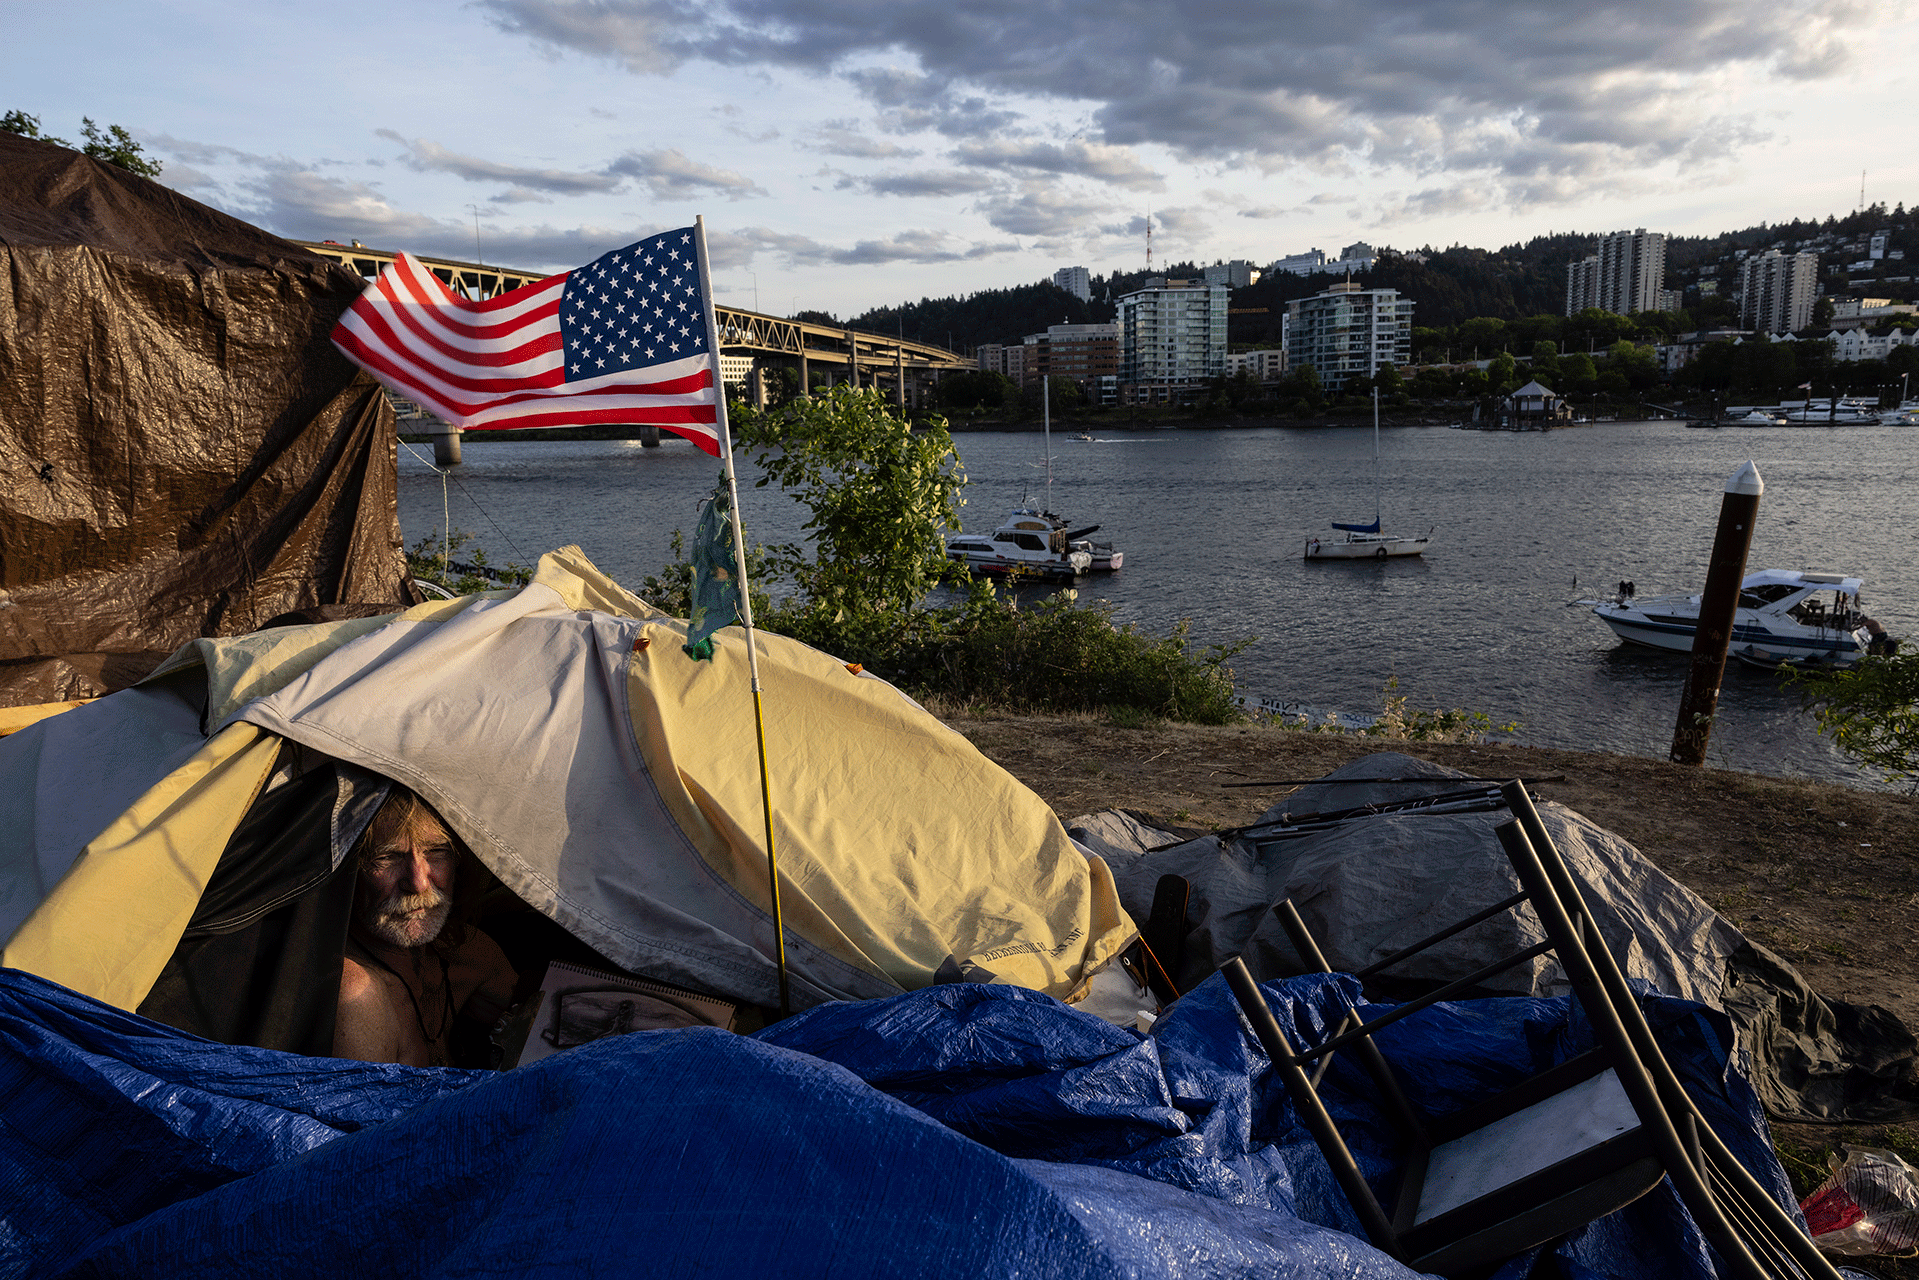 Frank, who is experiencing homelessness, sits in his tent in Portland, Oregon, next to the Willamette River on June 5, 2021.